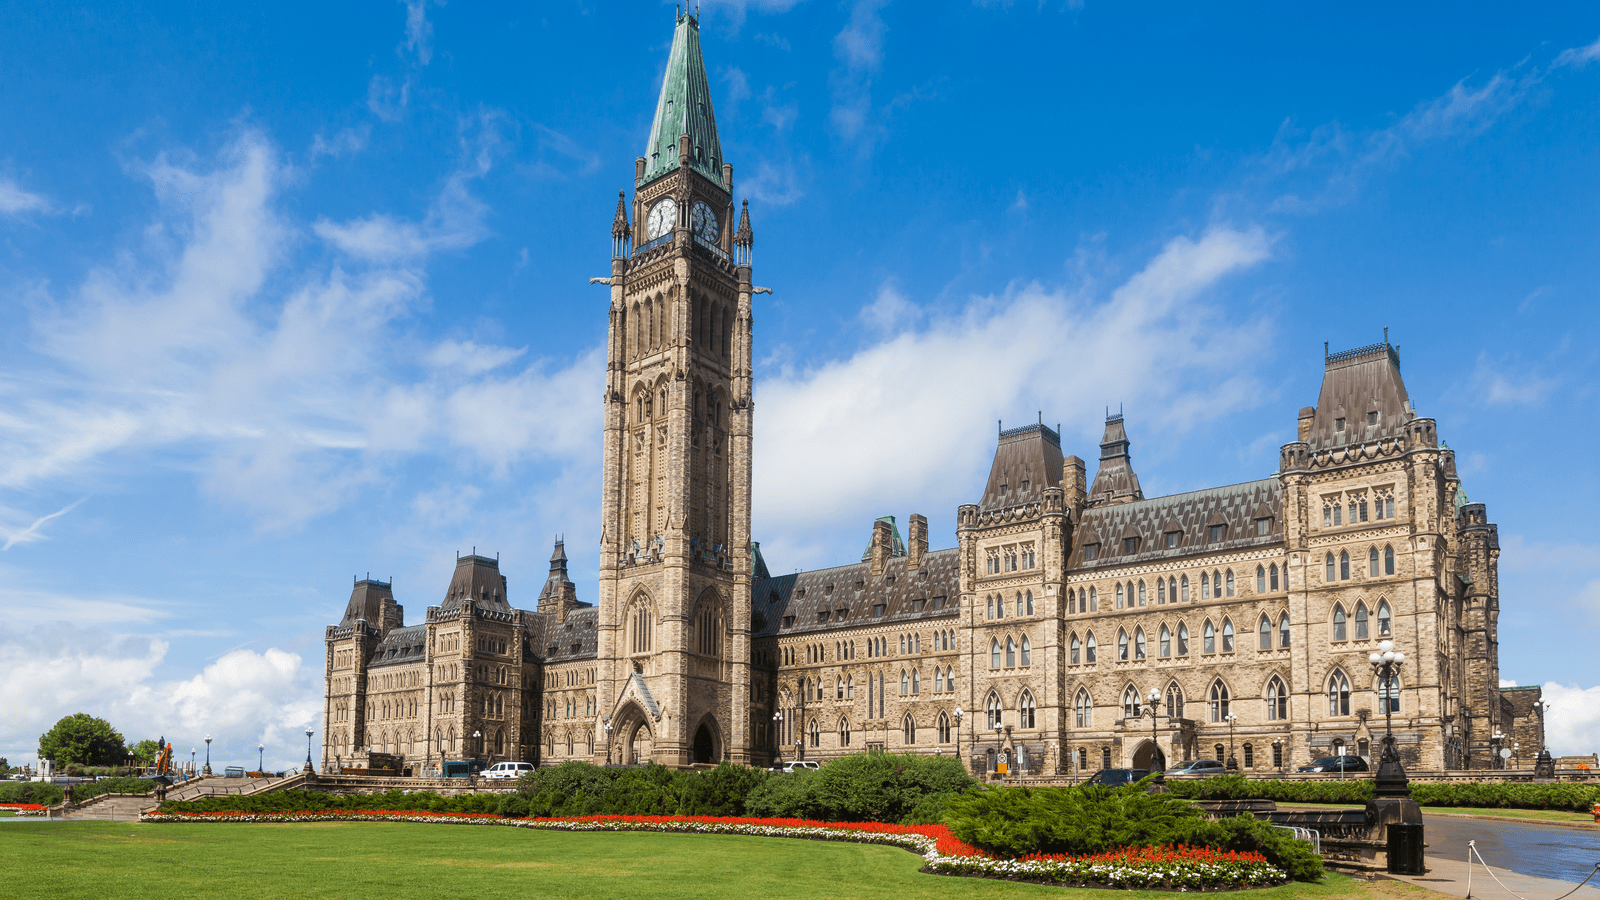 The Center Block and the Peace Tower in Parliament Hill, Ottawa, Canada.